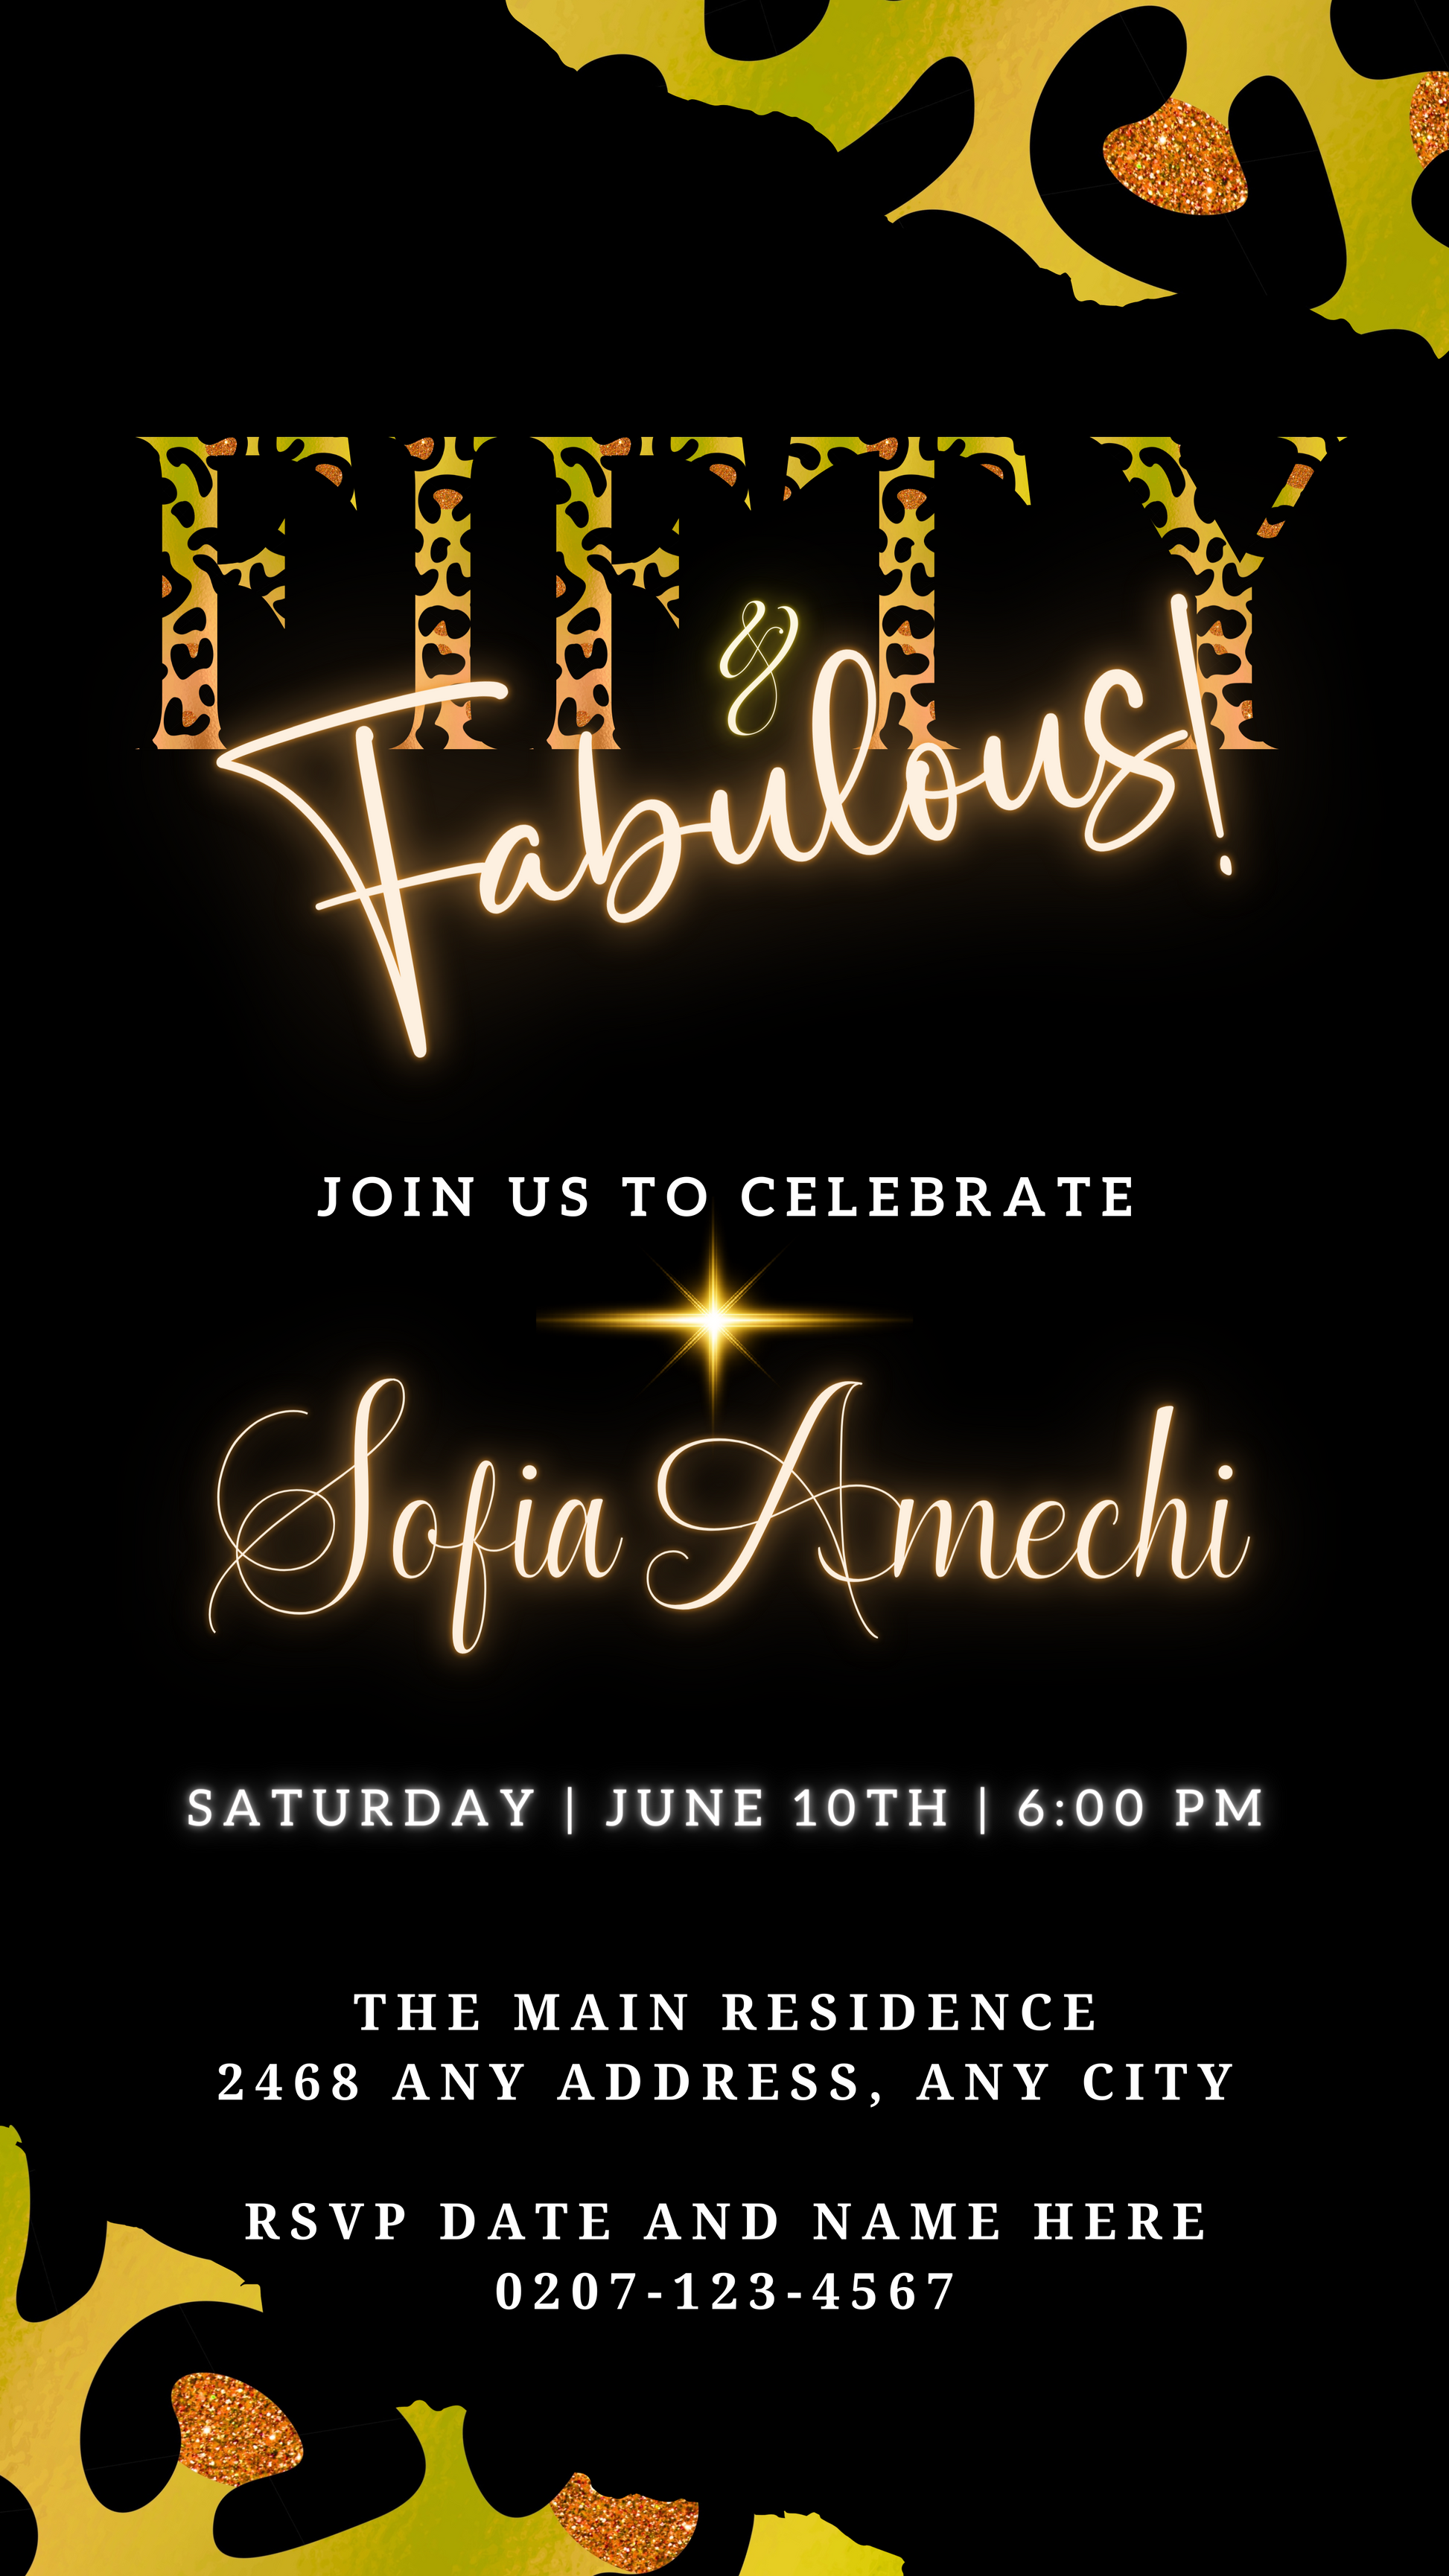 Black and gold Fifty & Fabulous digital invitation with leopard print, customizable via Canva for birthdays and other occasions. Download instantly and personalize easily.